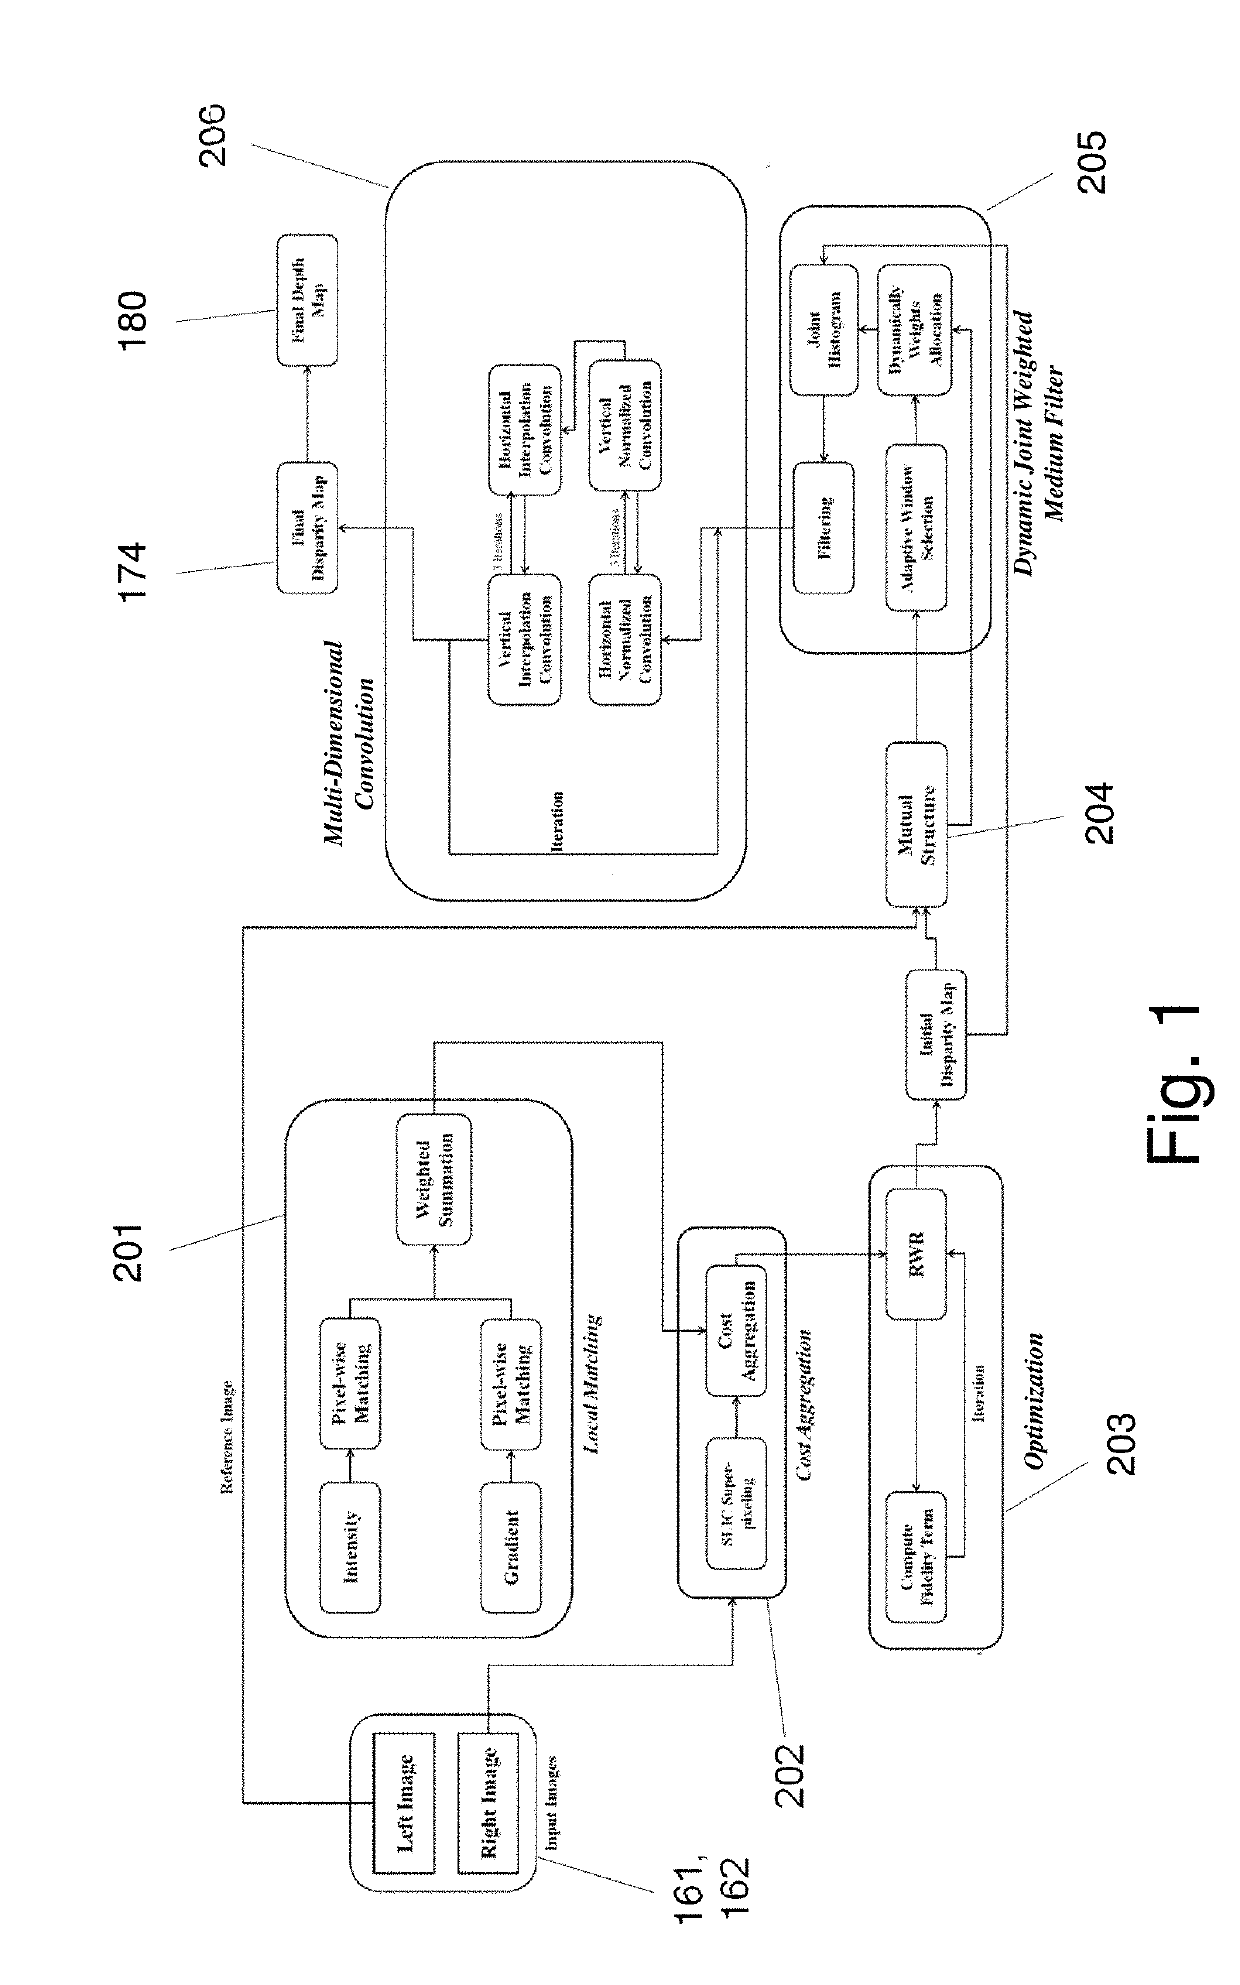 Systems and methods for providing depth map information